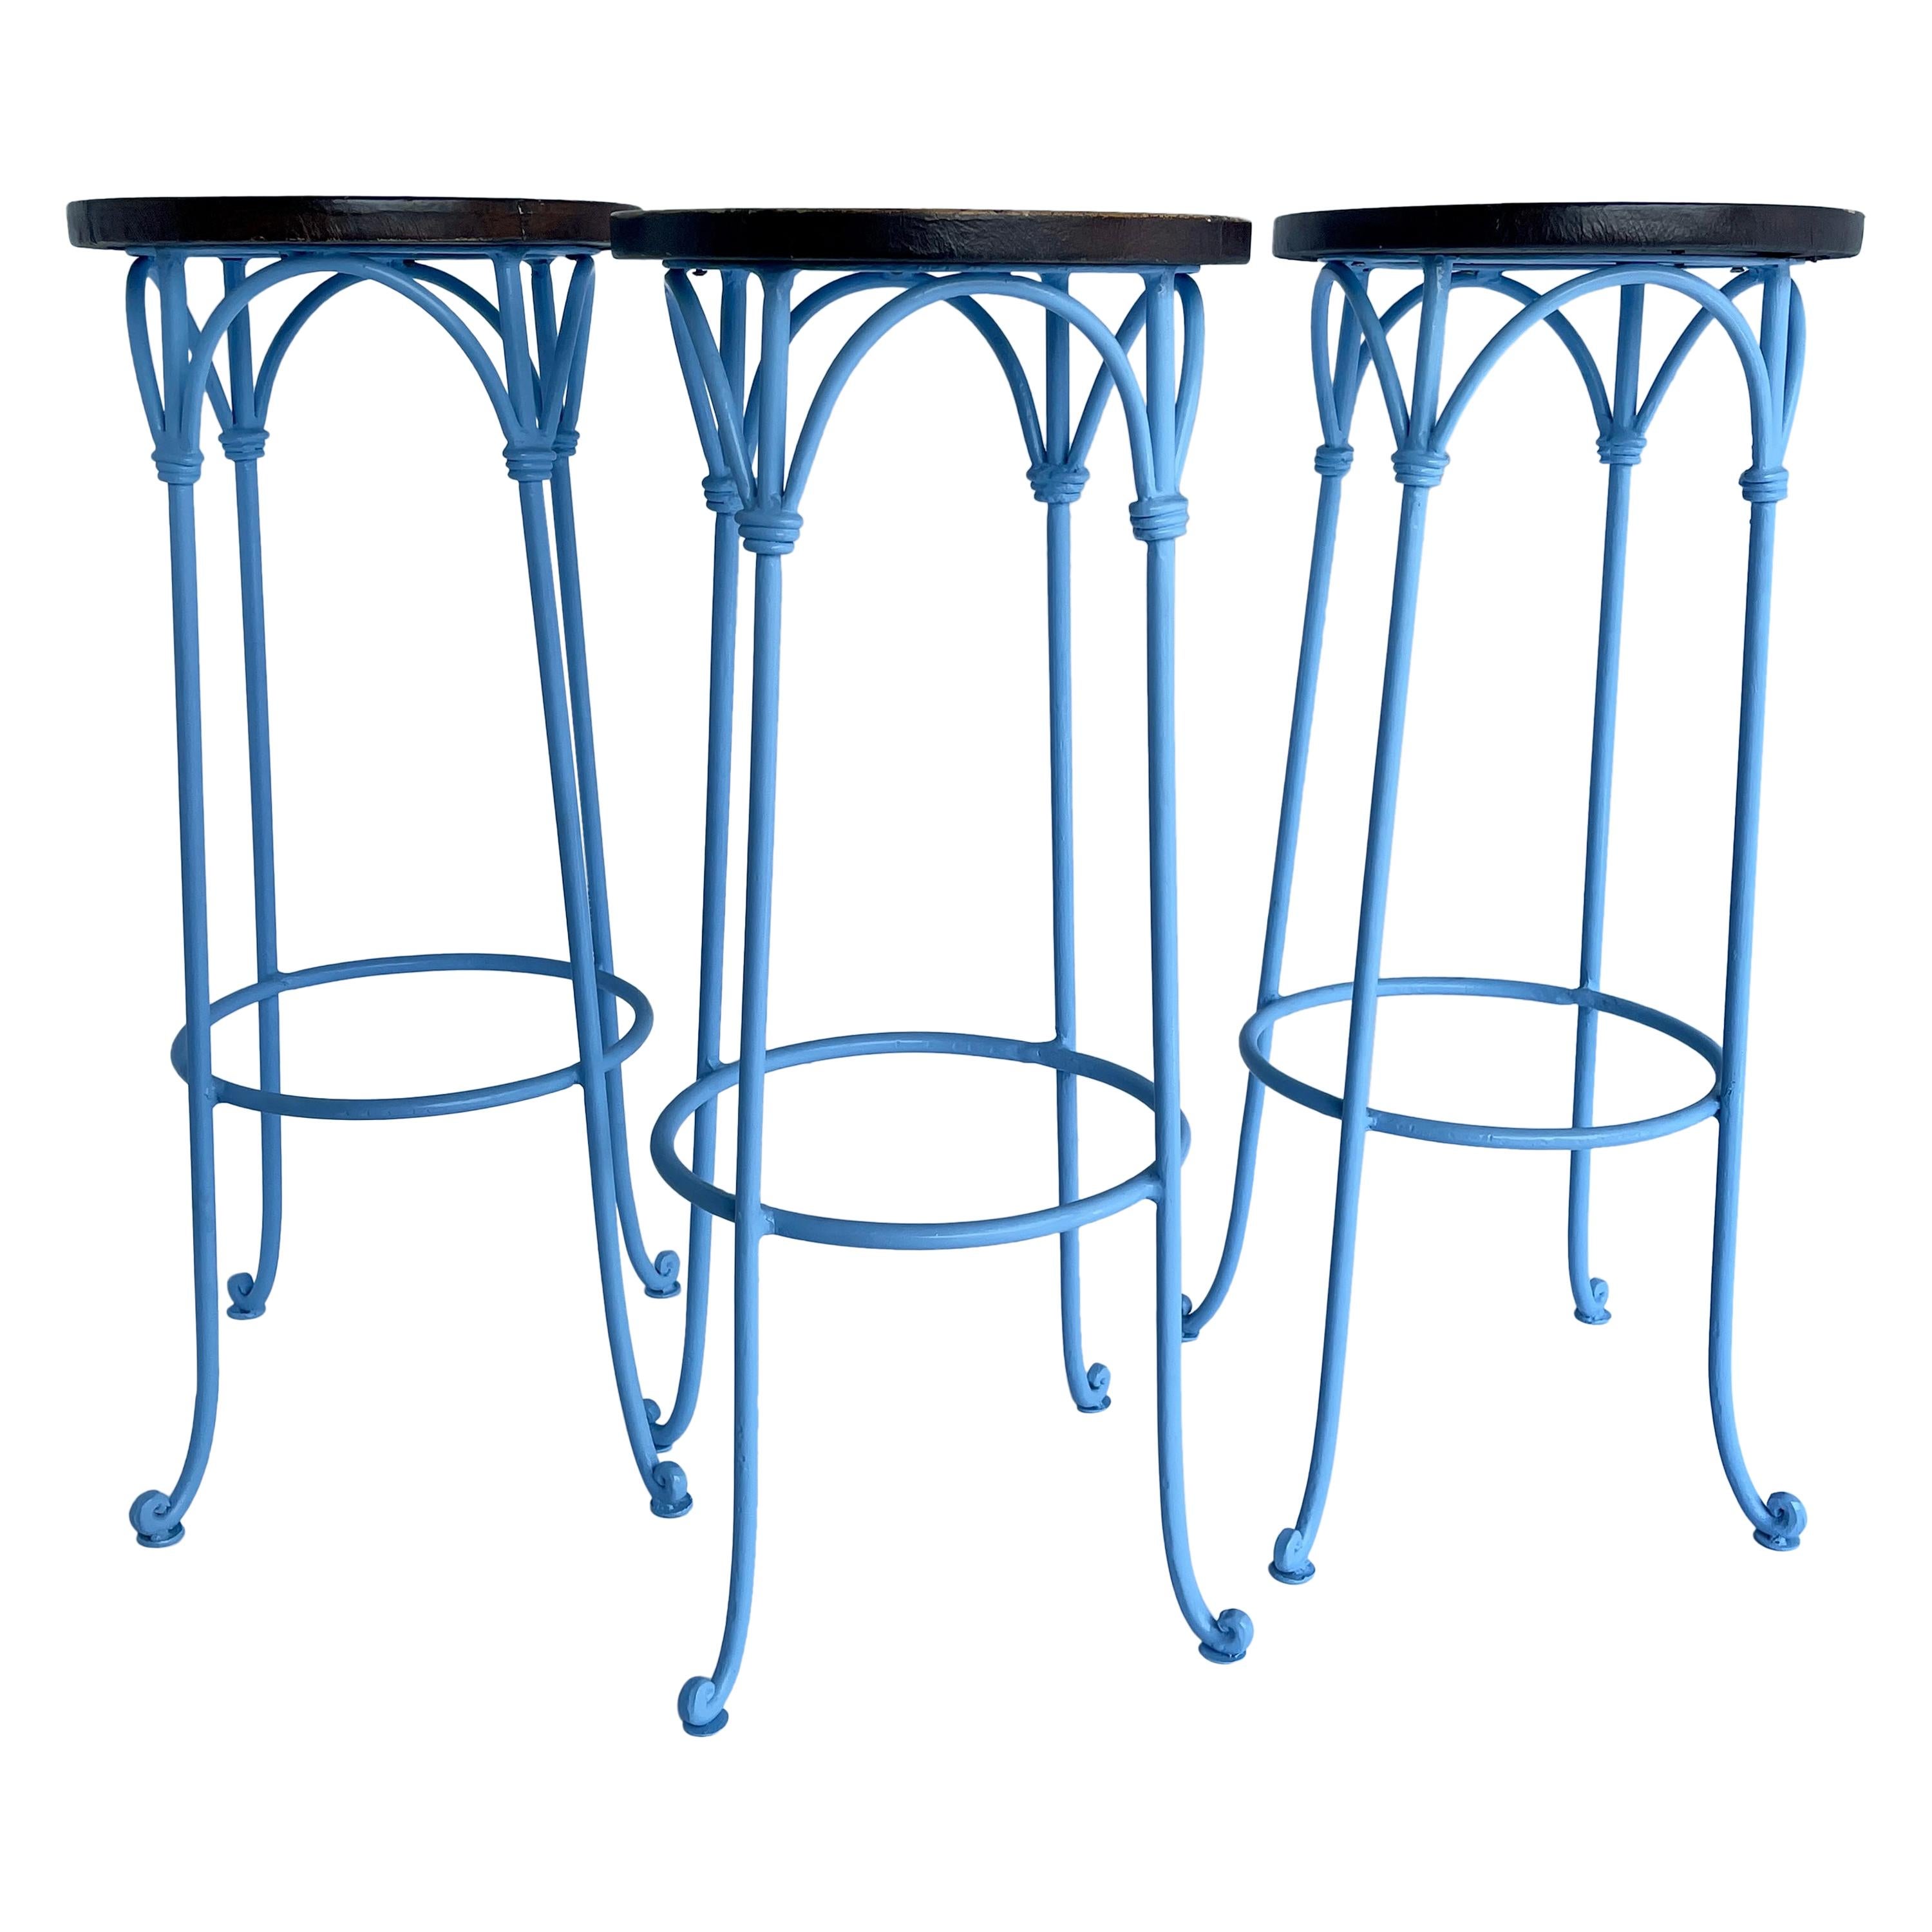 Three Blue Barstools with Leather Seats, Legs Powder Coated For Sale